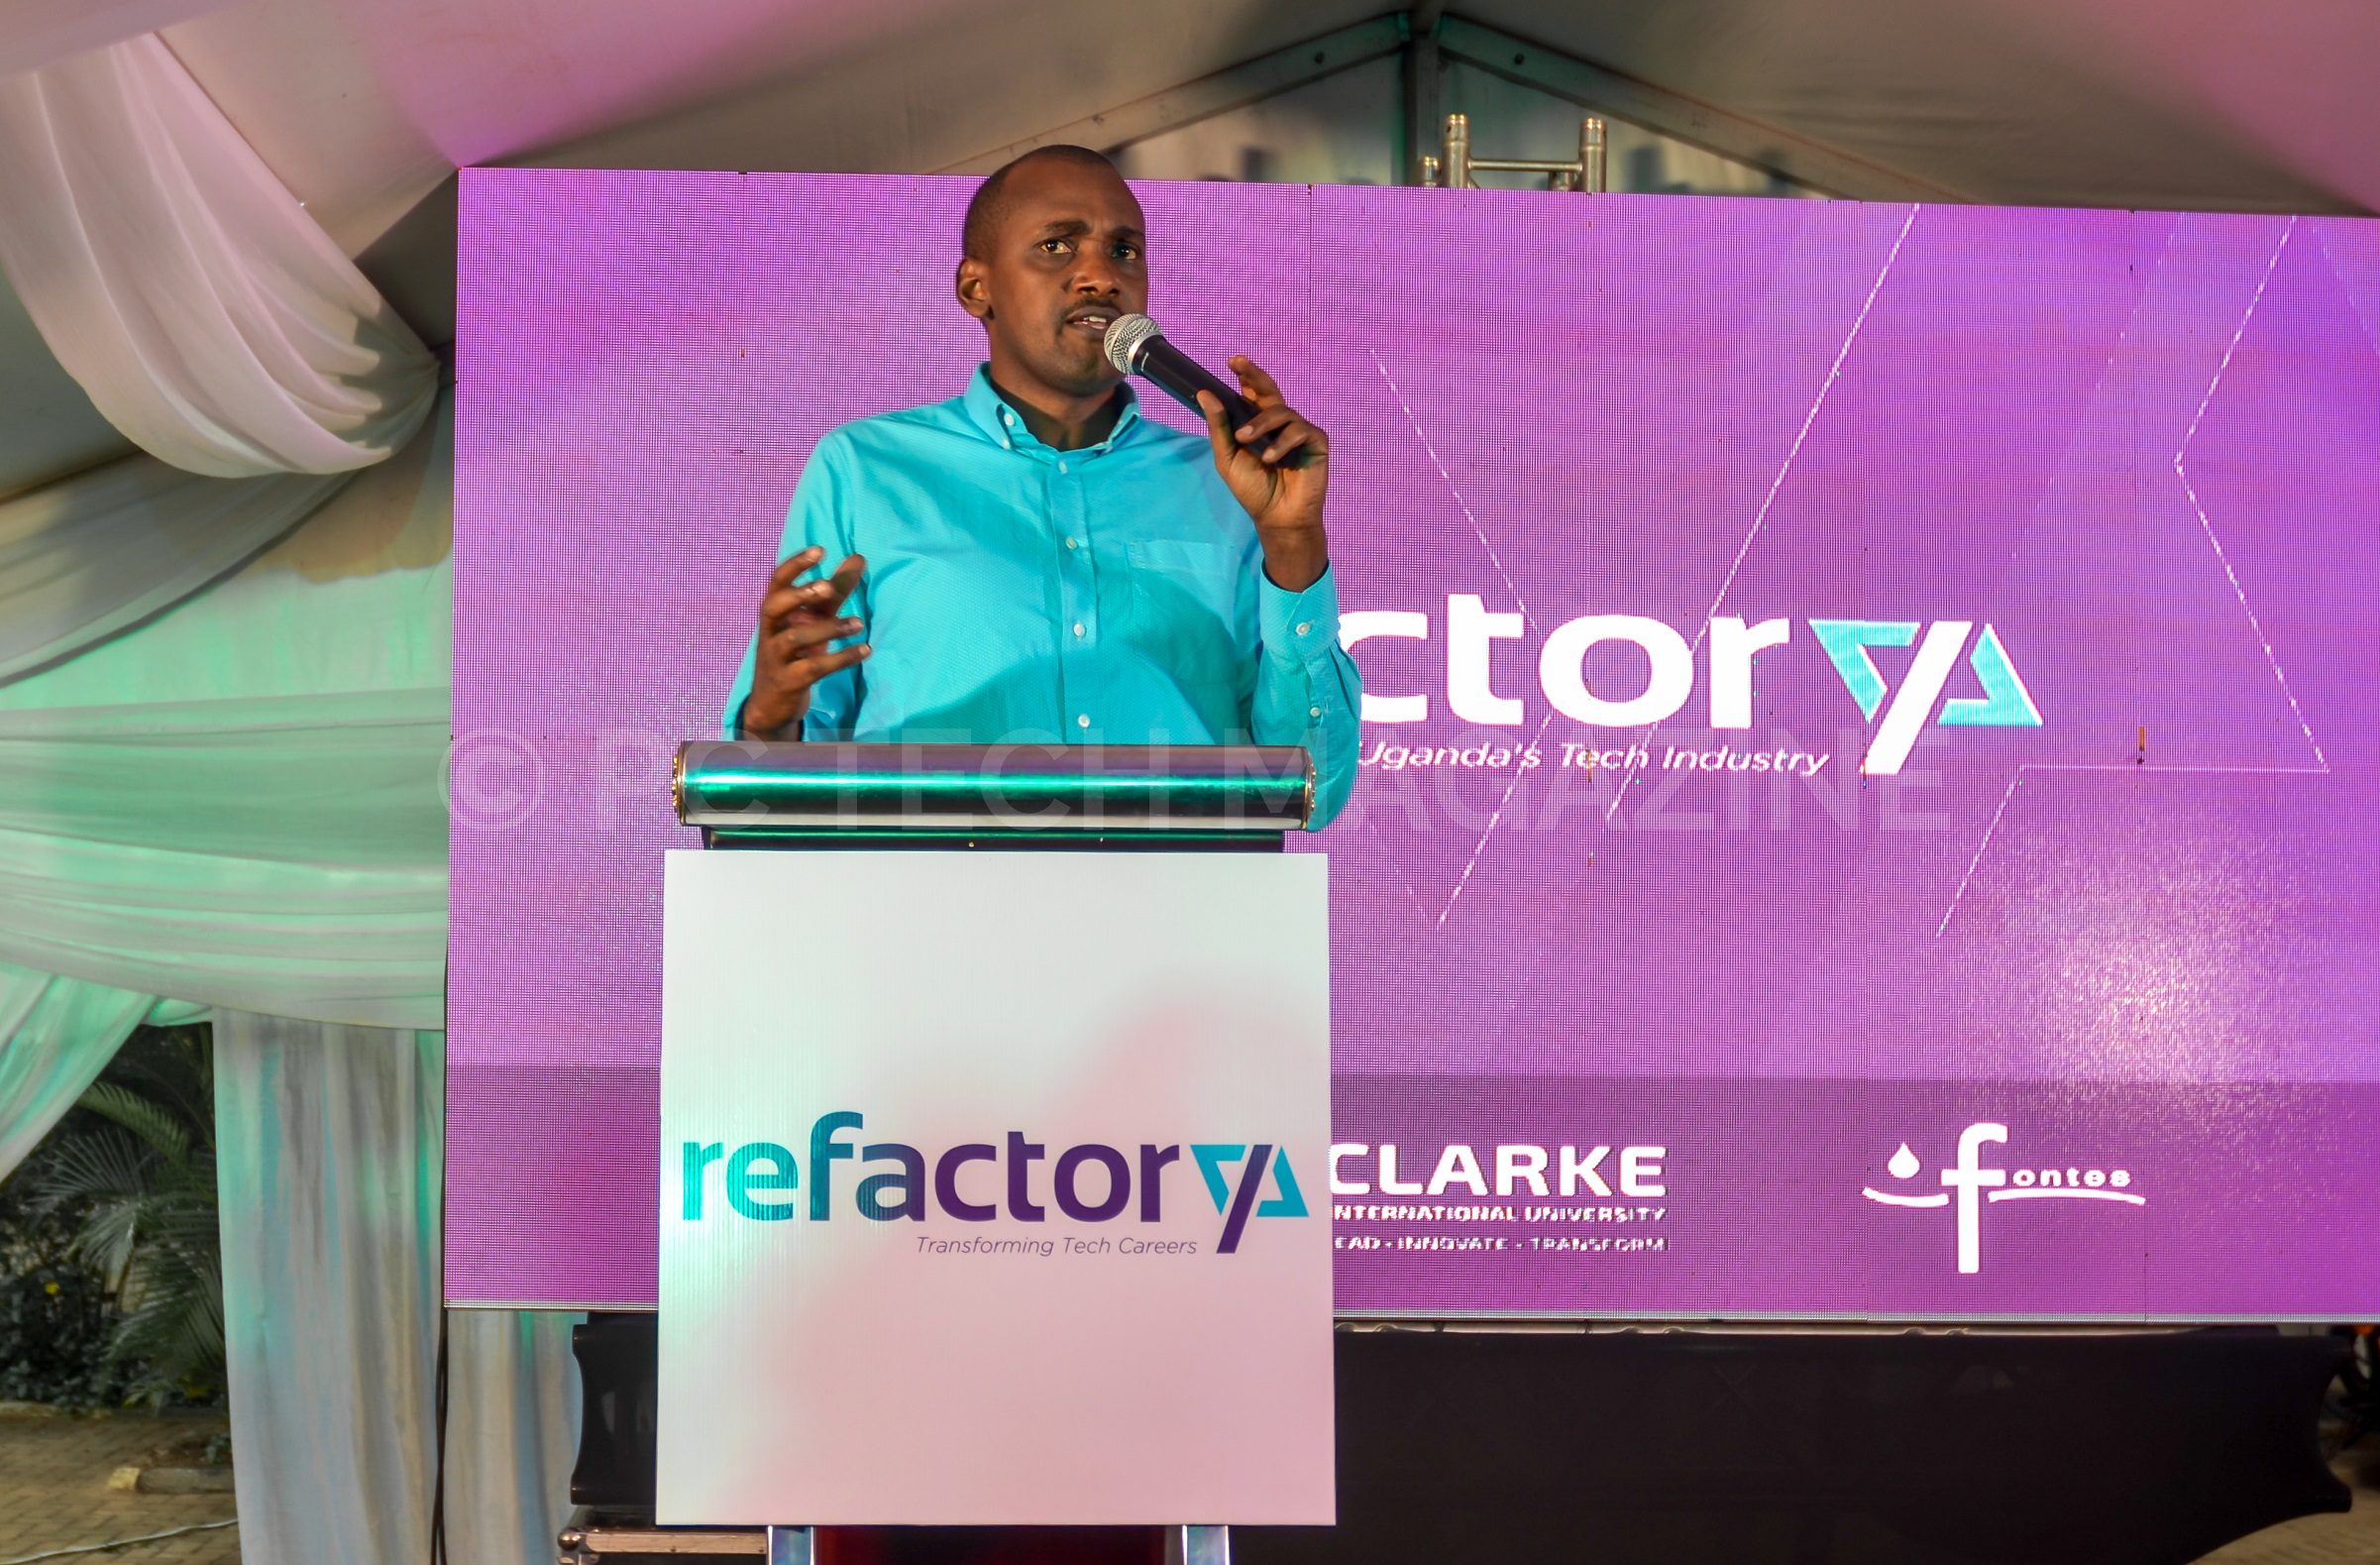 Minister of ICT and National Guidance, Hon. Frank Tumwebaze speaking at the launch of the Refactory Program at Clarke International University on Wednesday 13th, June 2019.